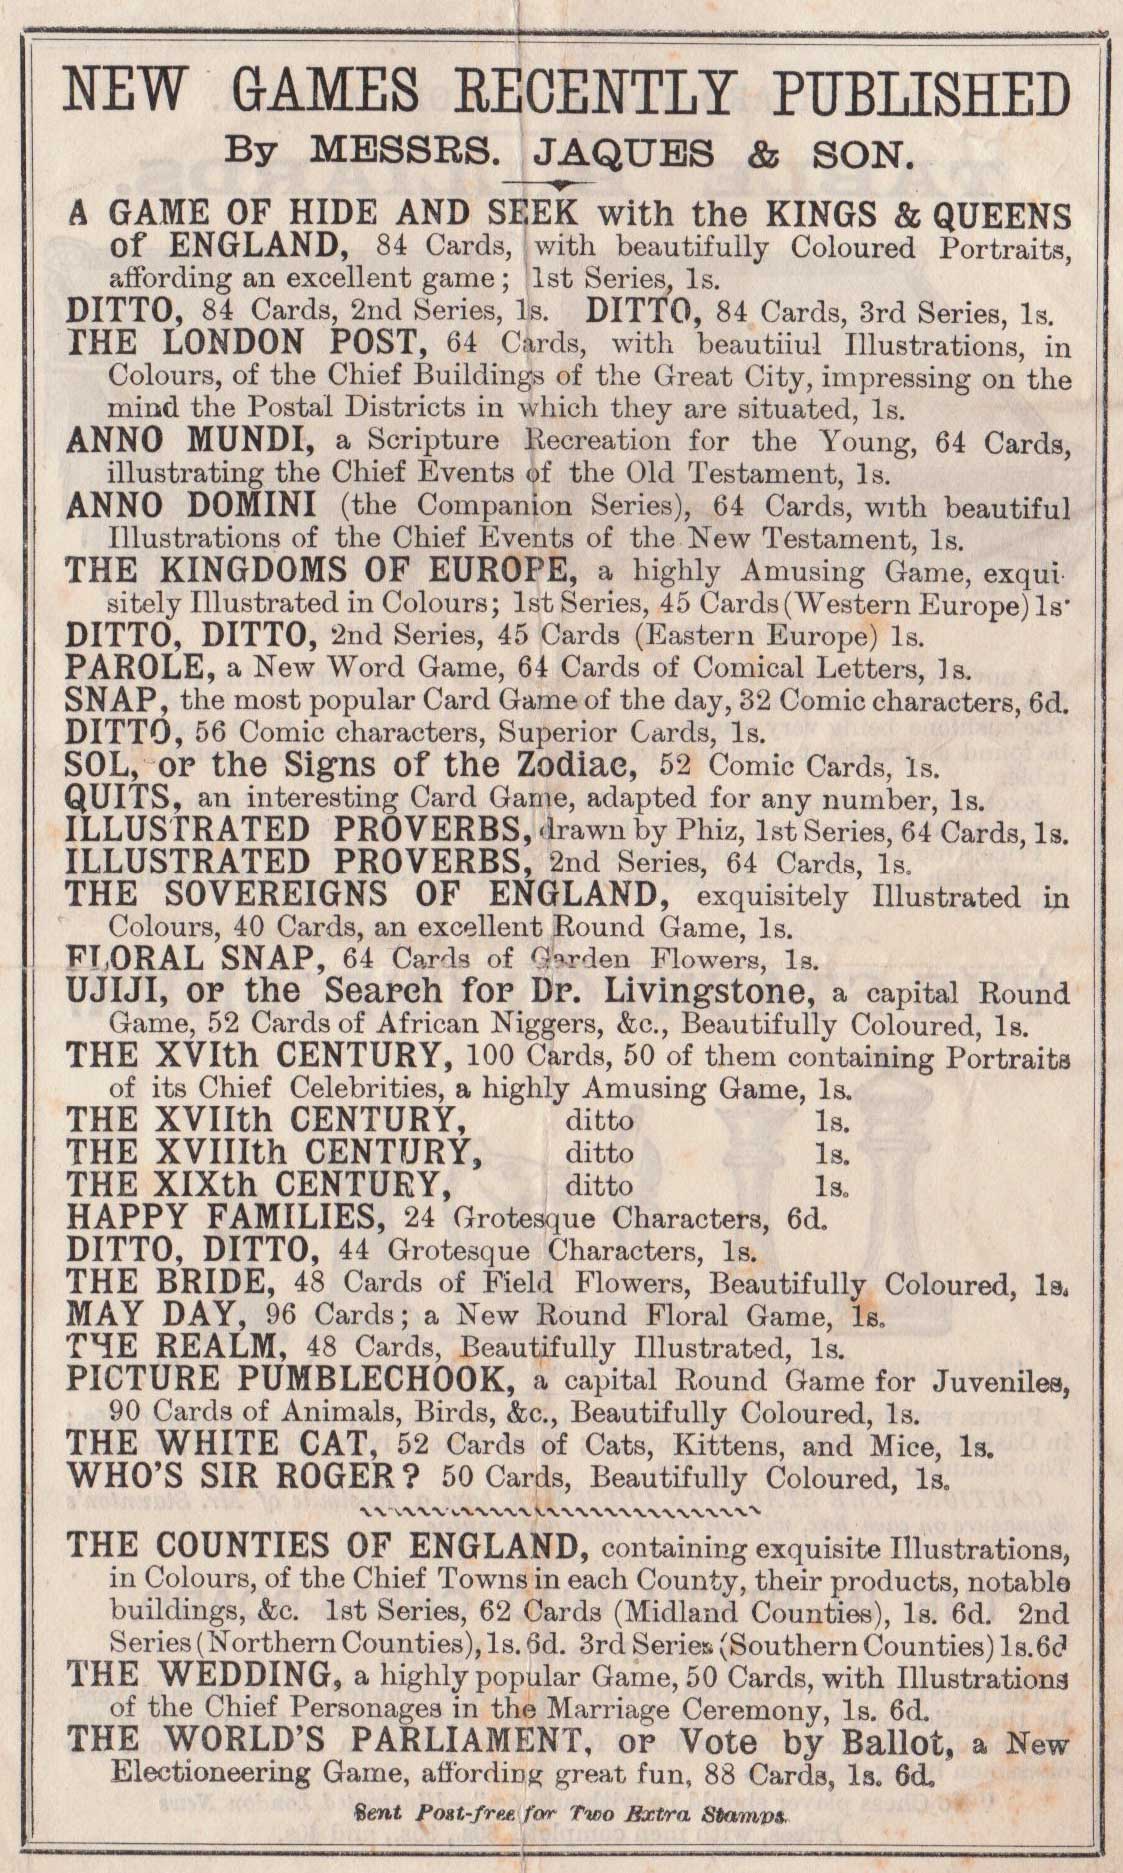 list of new games, c.1875